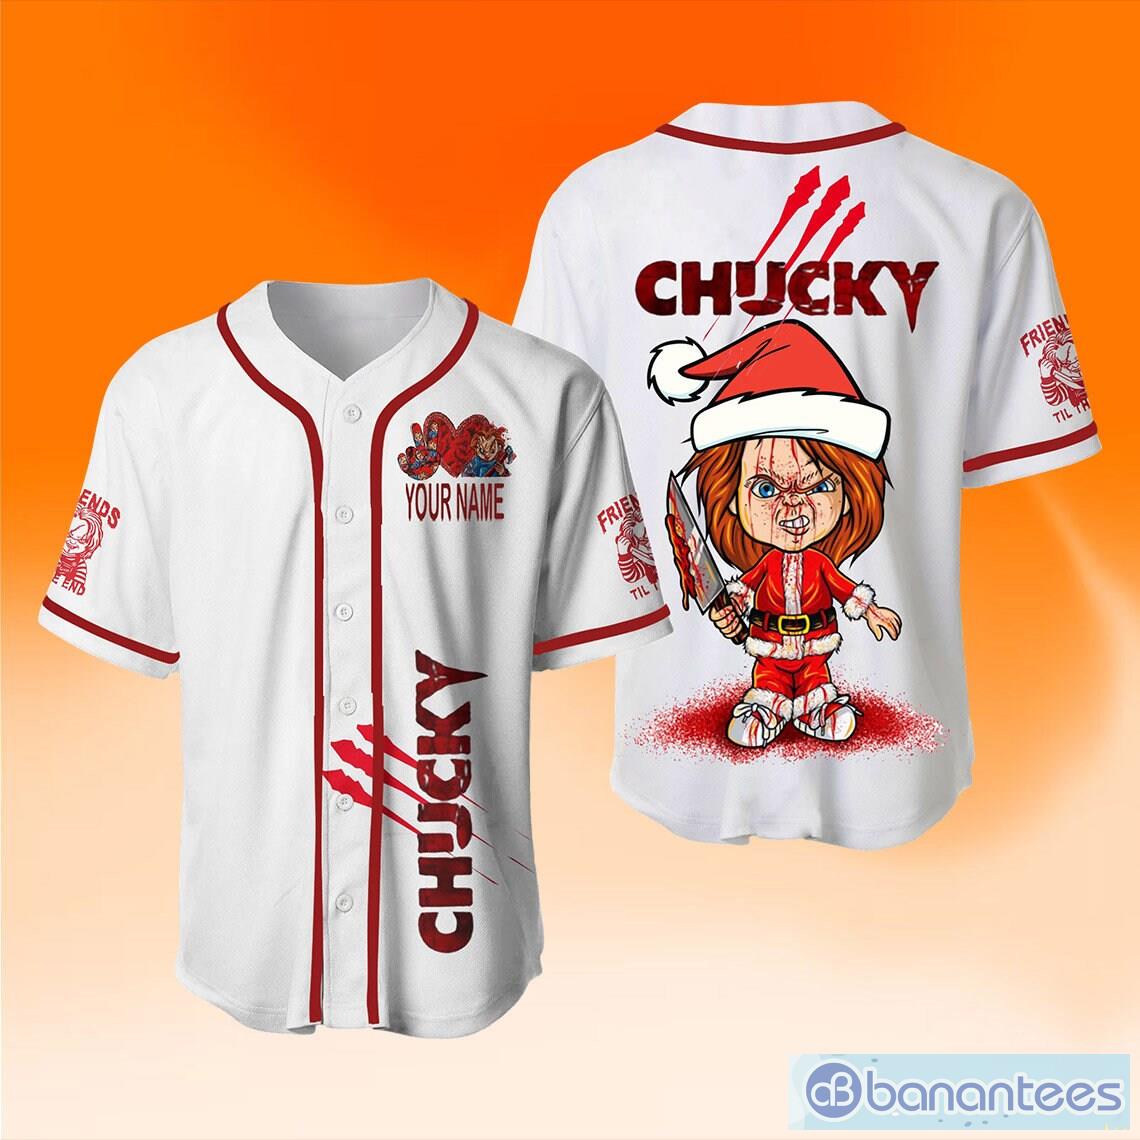 Real Baseball Jersey Outfits for Men & Women 